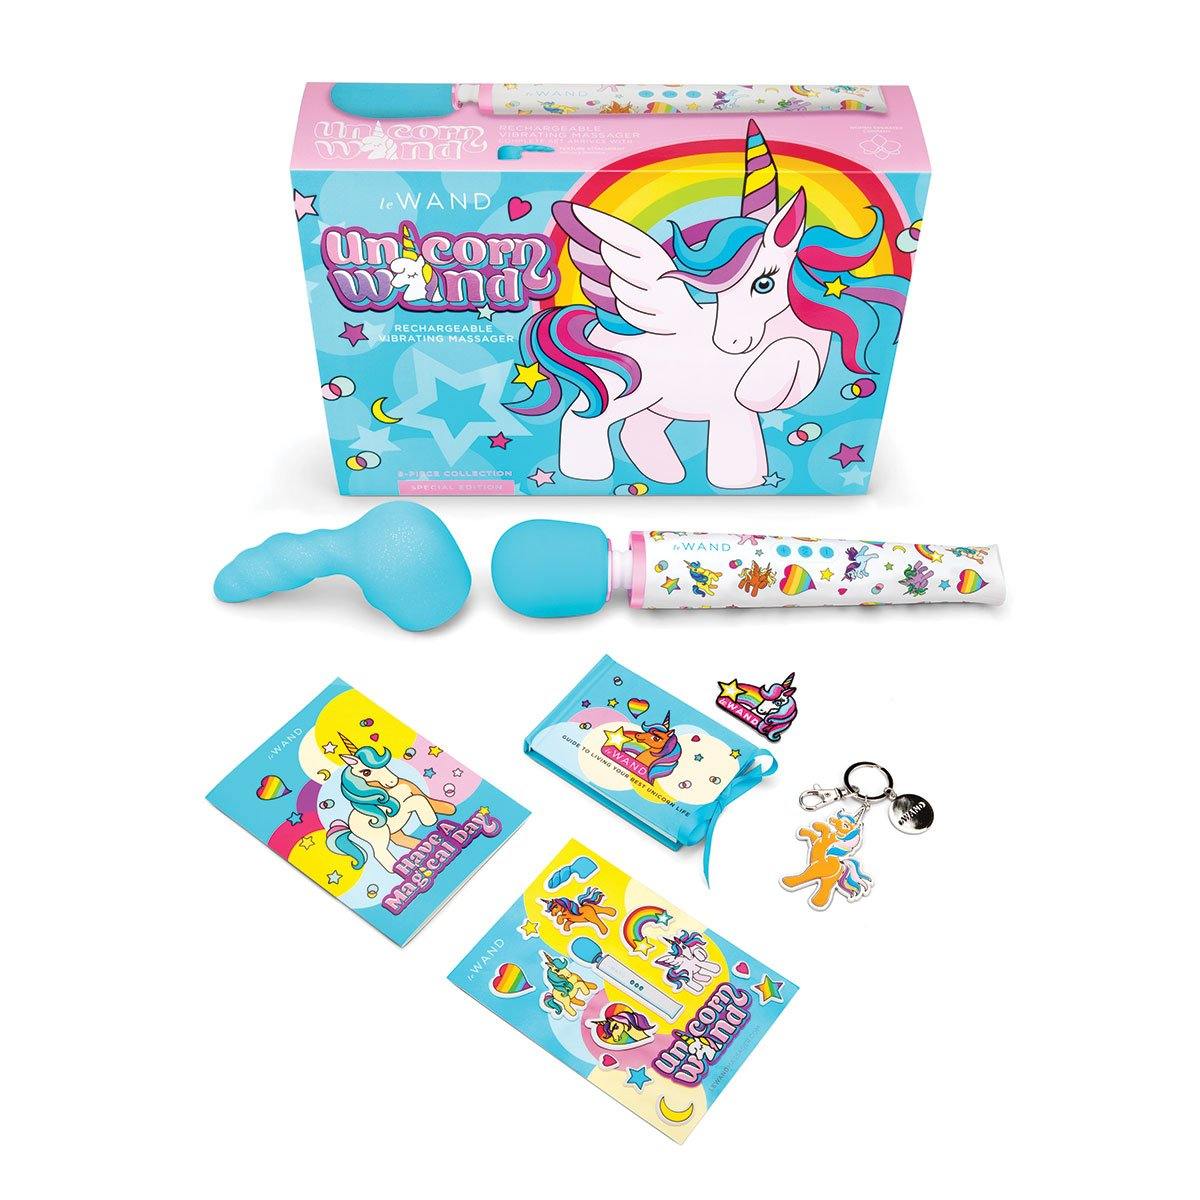 Le Wand Unicorn Wand 8pc Collection - Buy At Luxury Toy X - Free 3-Day Shipping